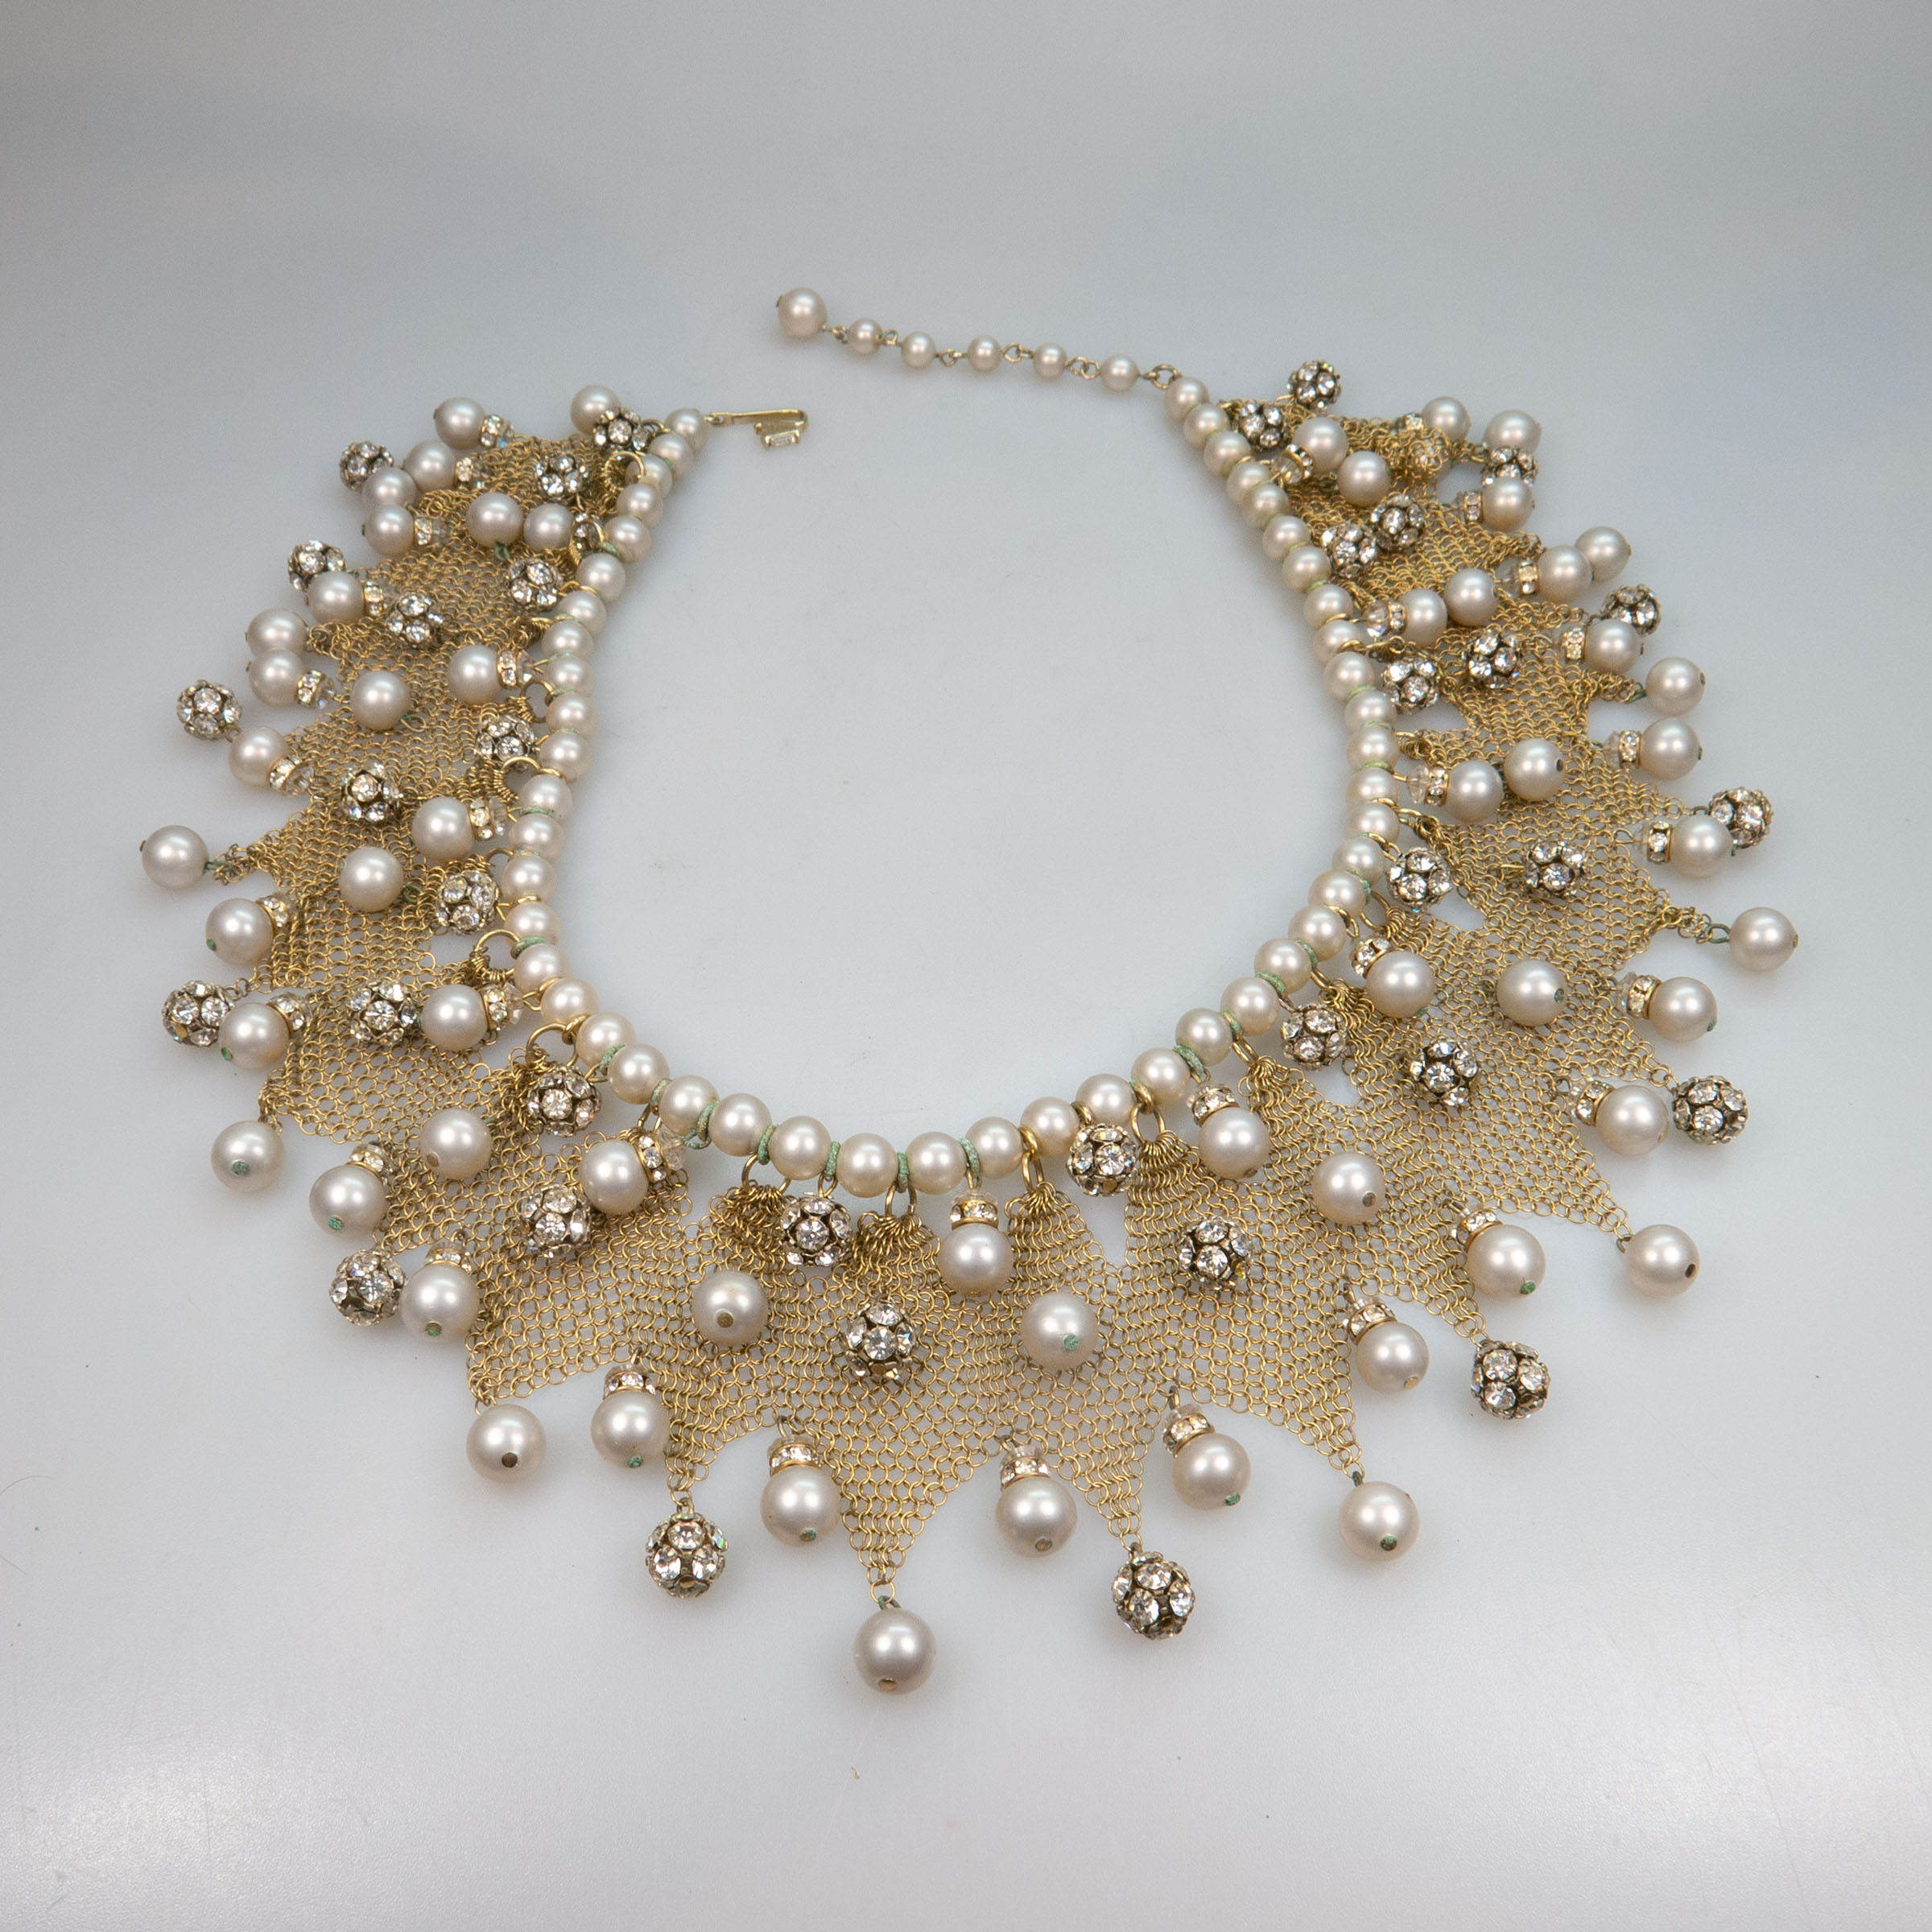 Vendome Gold-Tone Metal Mesh And Faux Pearl Fringe Necklace